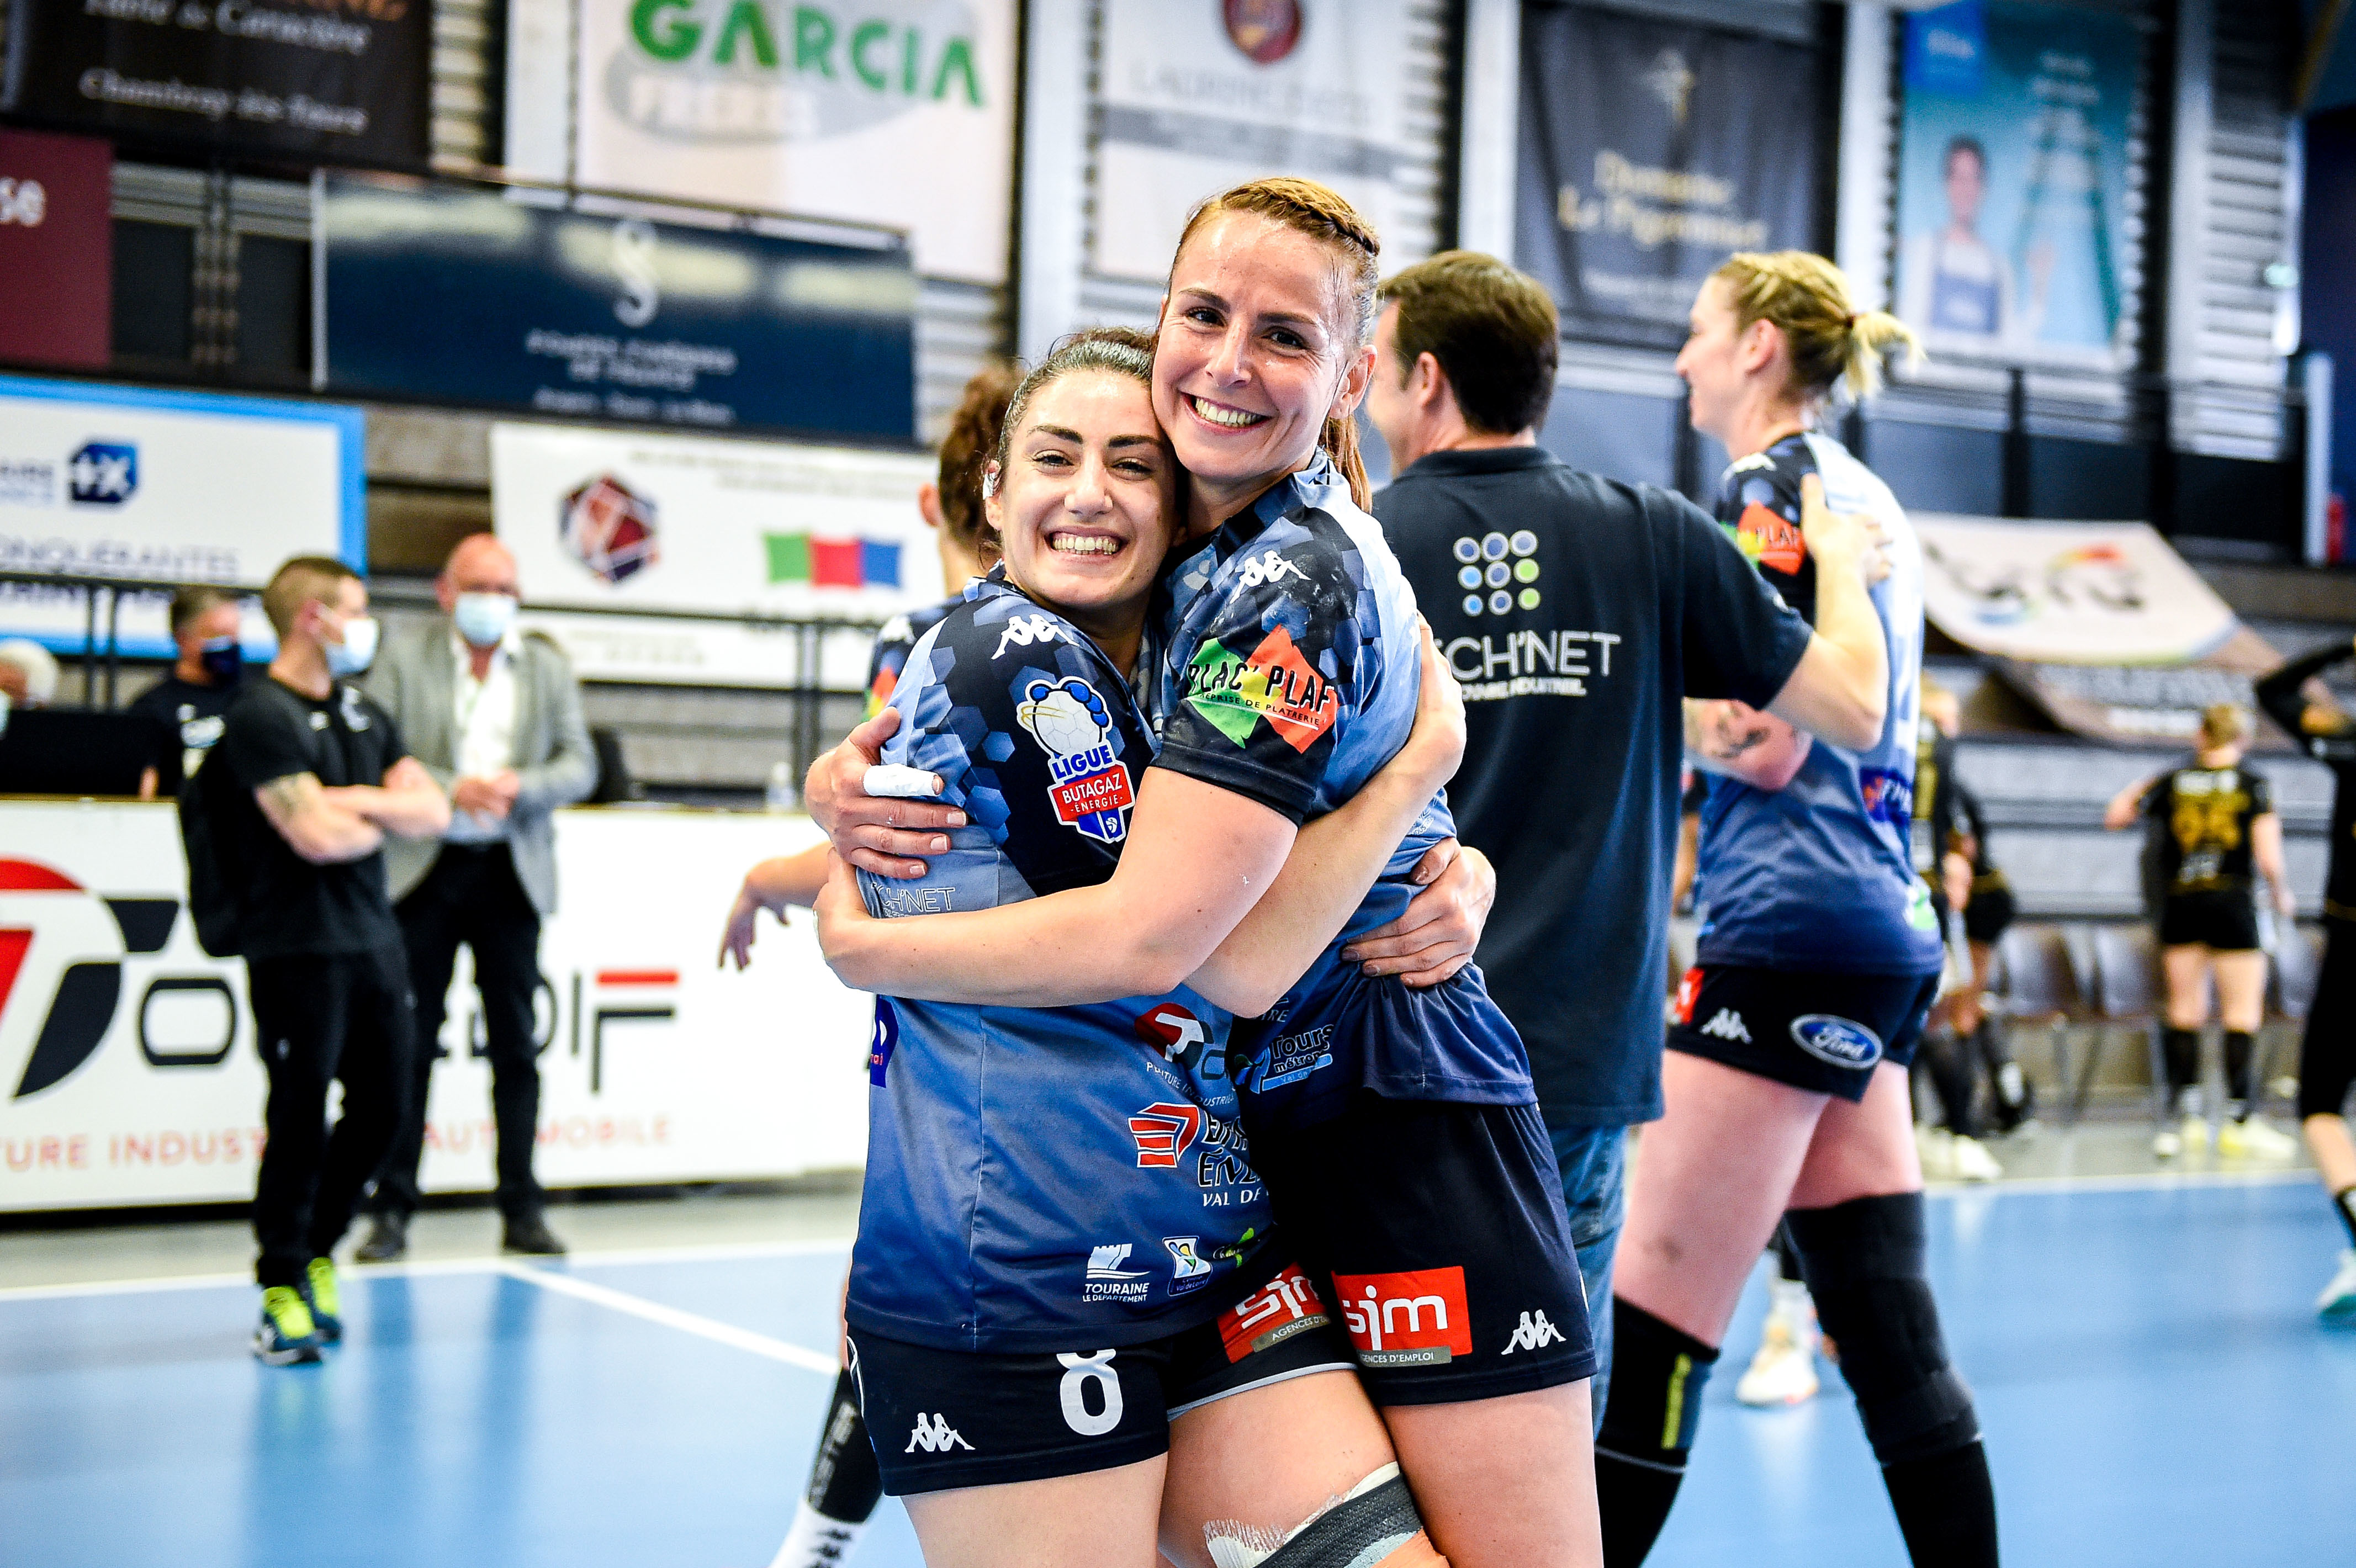 Caroline VALENTE  of CTHB and Nina BRKLJACIC of CTHB celebrate during the Ligue Butagaz Energie match between Chambray and Paris 92 on May 8, 2021 in Chambray-les-Tours, France. (Photo by Hugo Pfeiffer/Icon Sport)